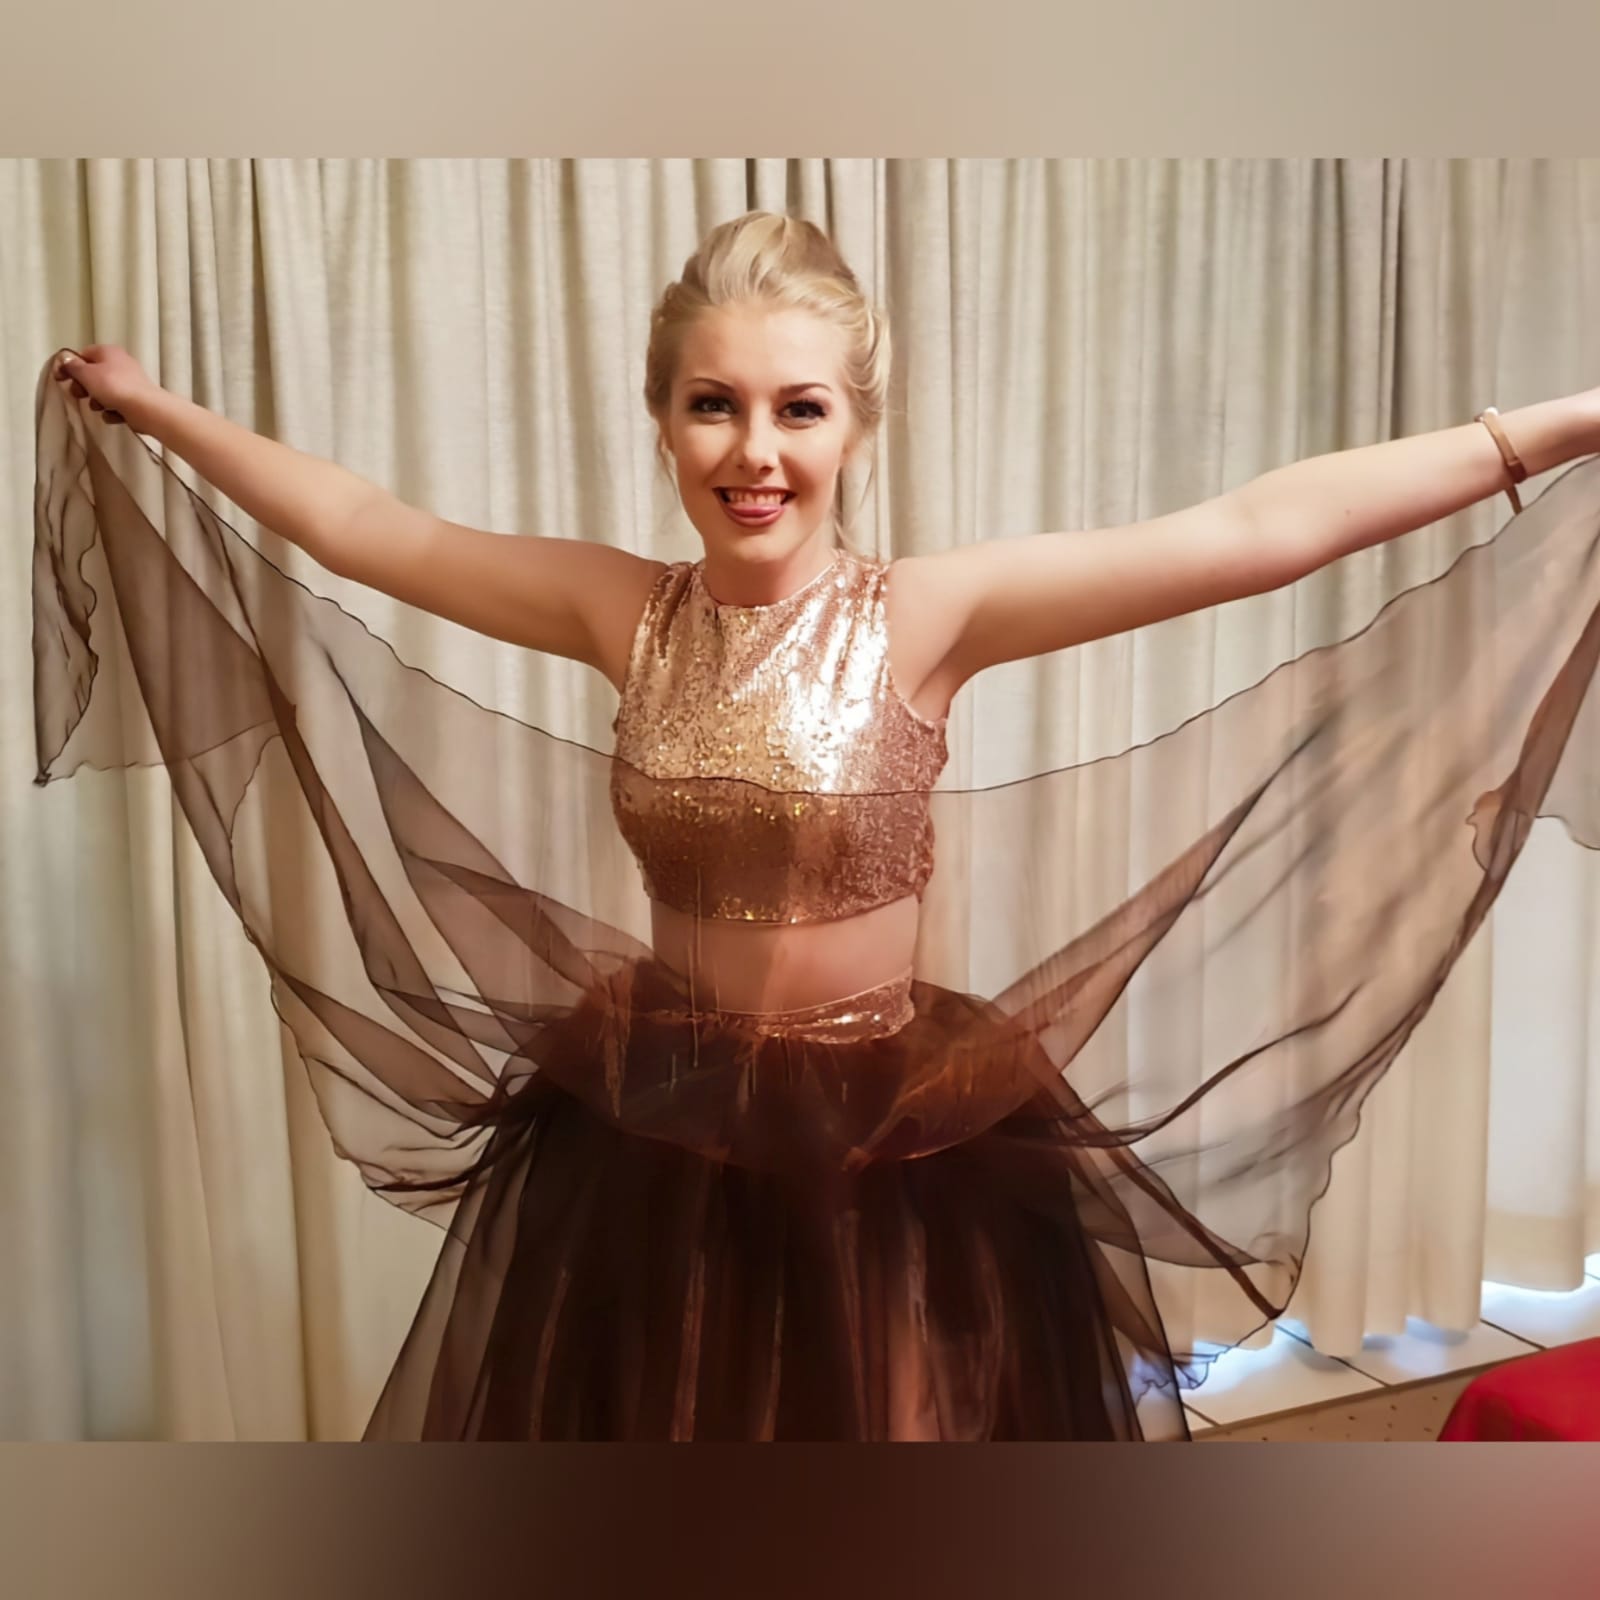 2 piece brown and rose gold prom dress 3 this awesome versatile evening dress was created for a prom dance. 2 piece brown and rose gold prom dress. With a layered organza full skirt and sequins waistband. Crop top in rosegold sequins which can be reused in several other occasions.